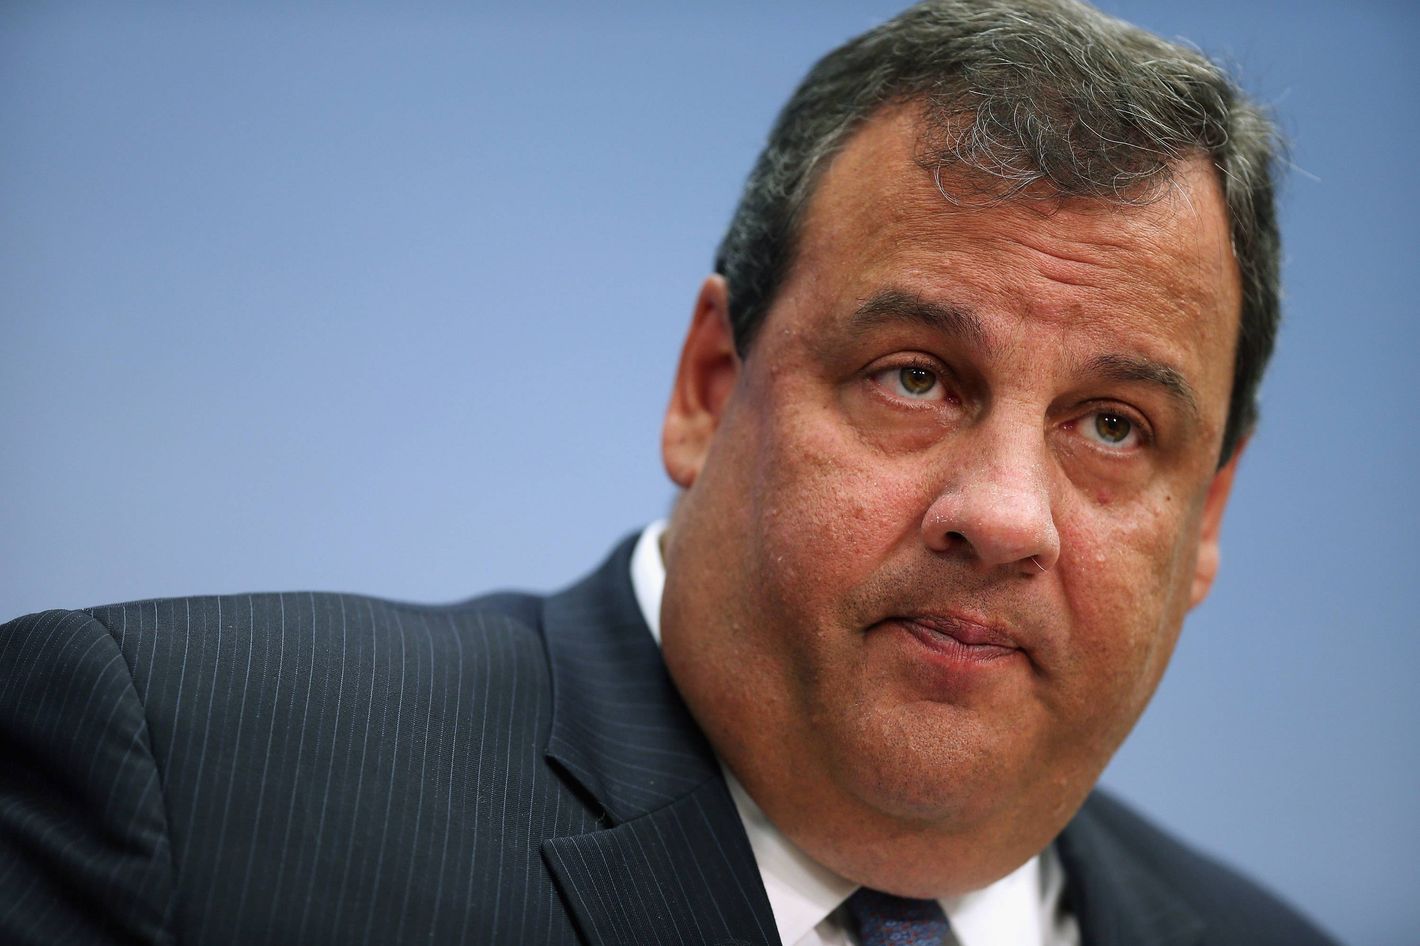 For years, New Jersey Gov. Chris Christie has sought to rein in out-of-control public spending in his state while leaving government union bosses' monopoly-bargaining privileges essentially unchanged. It's now clearer than ever that it can't be done. Image: Chip Somodevilla/Getty Images